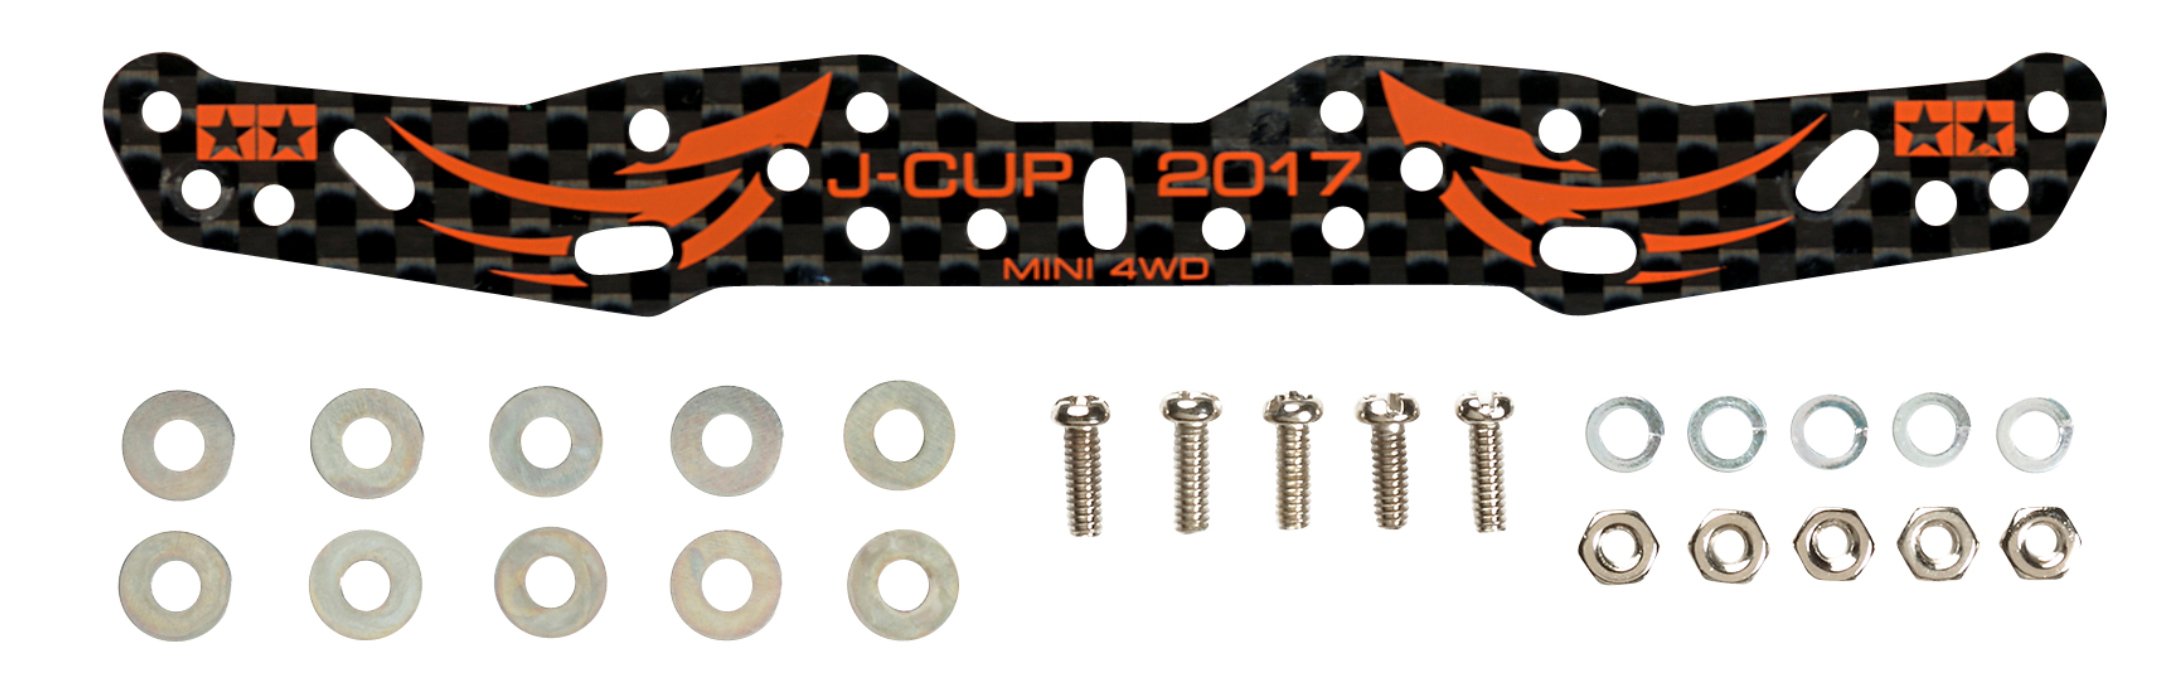 TAMIYA 95104 Mini 4Wd Hg Carbon Multi Roller Setting Stay 1.5Mm J-Cup 2017